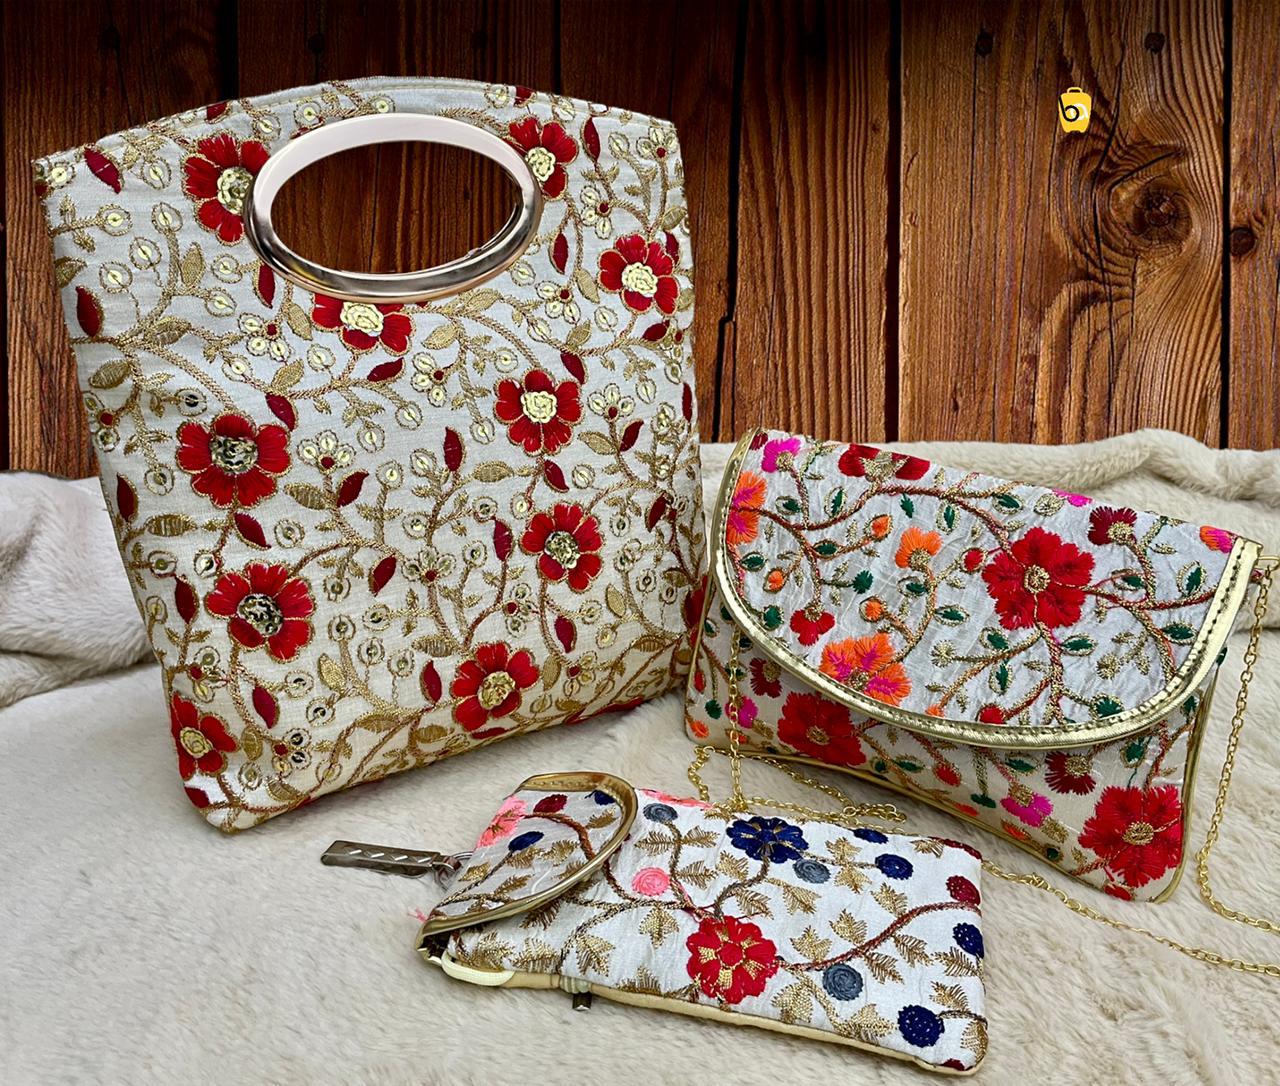 Embroidered Handbags Manufacturer Supplier from Mumbai India